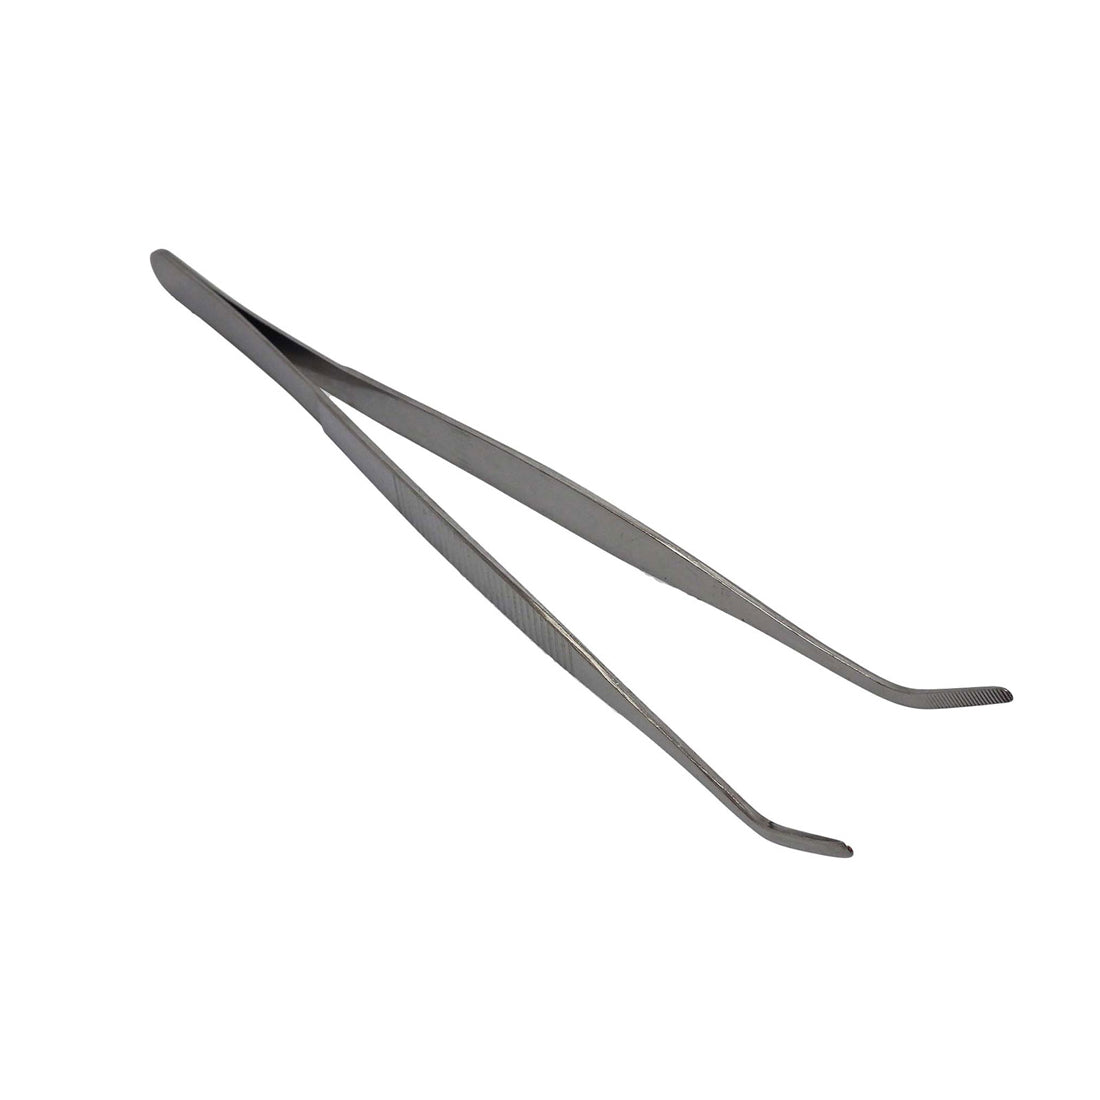 Livefood Stainless Steel Tweezers Curved End 300mm (12") Bulk Buy x24